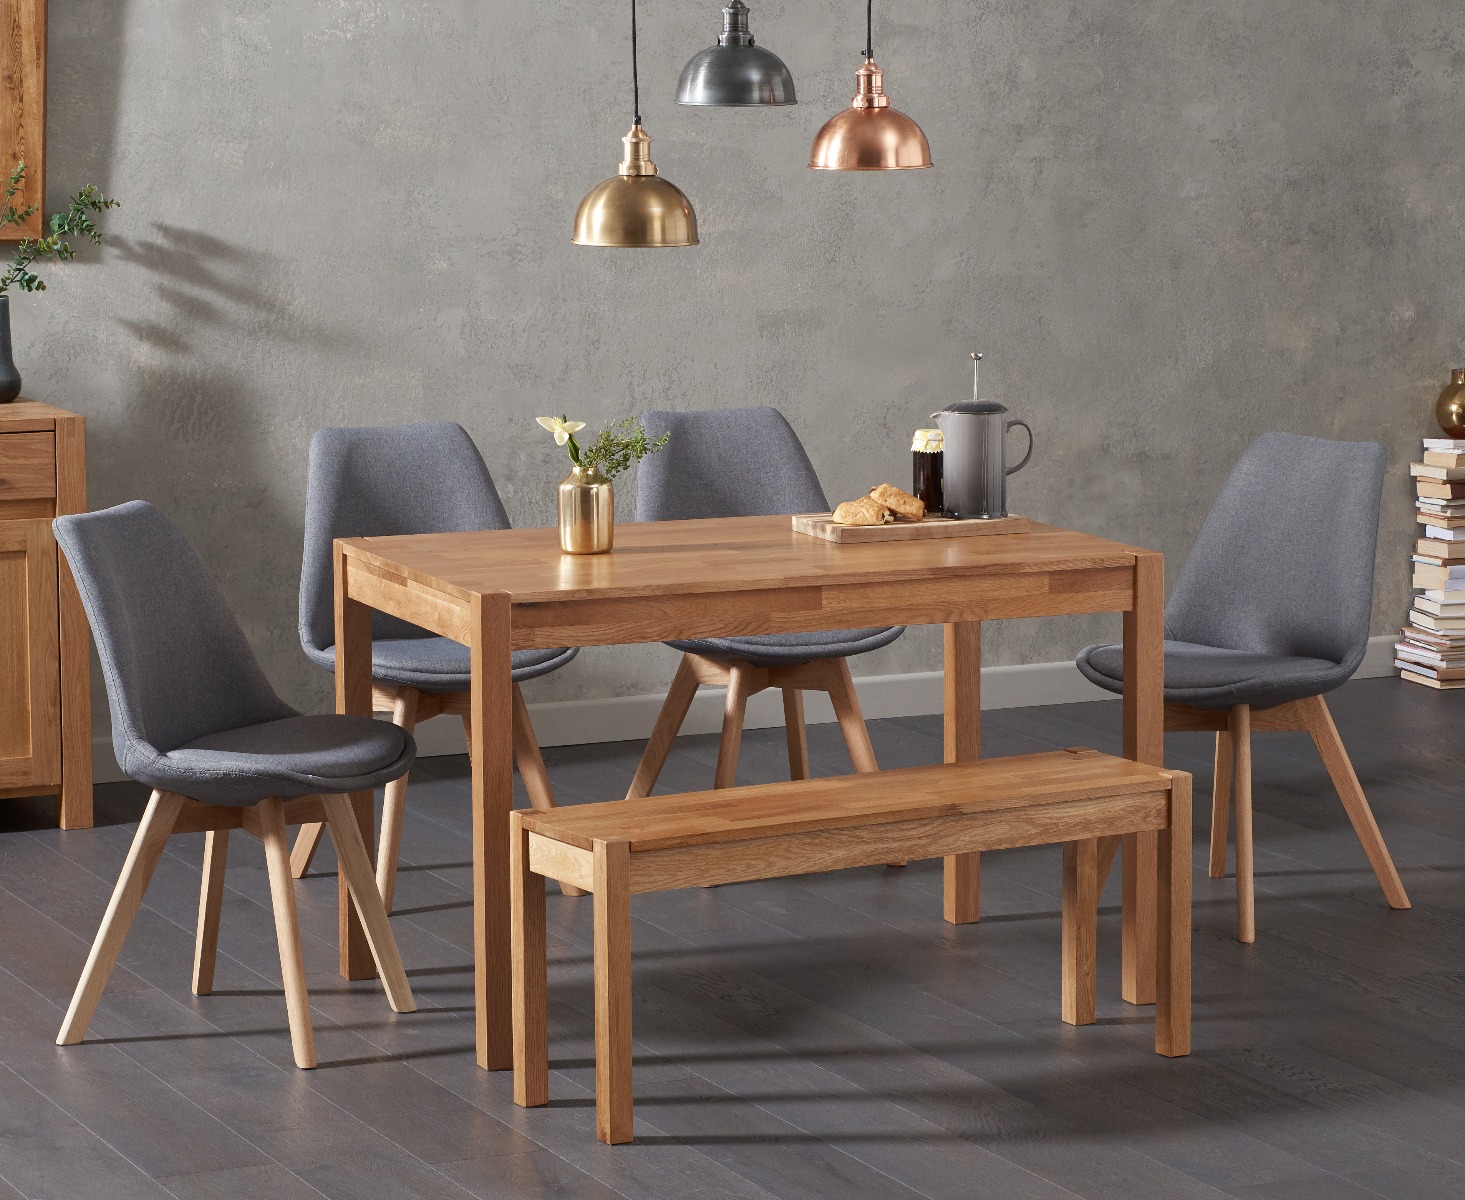 York 150cm Solid Oak Dining Table With 2 Dark Grey Orson Fabric Chairs And 1 York Bench